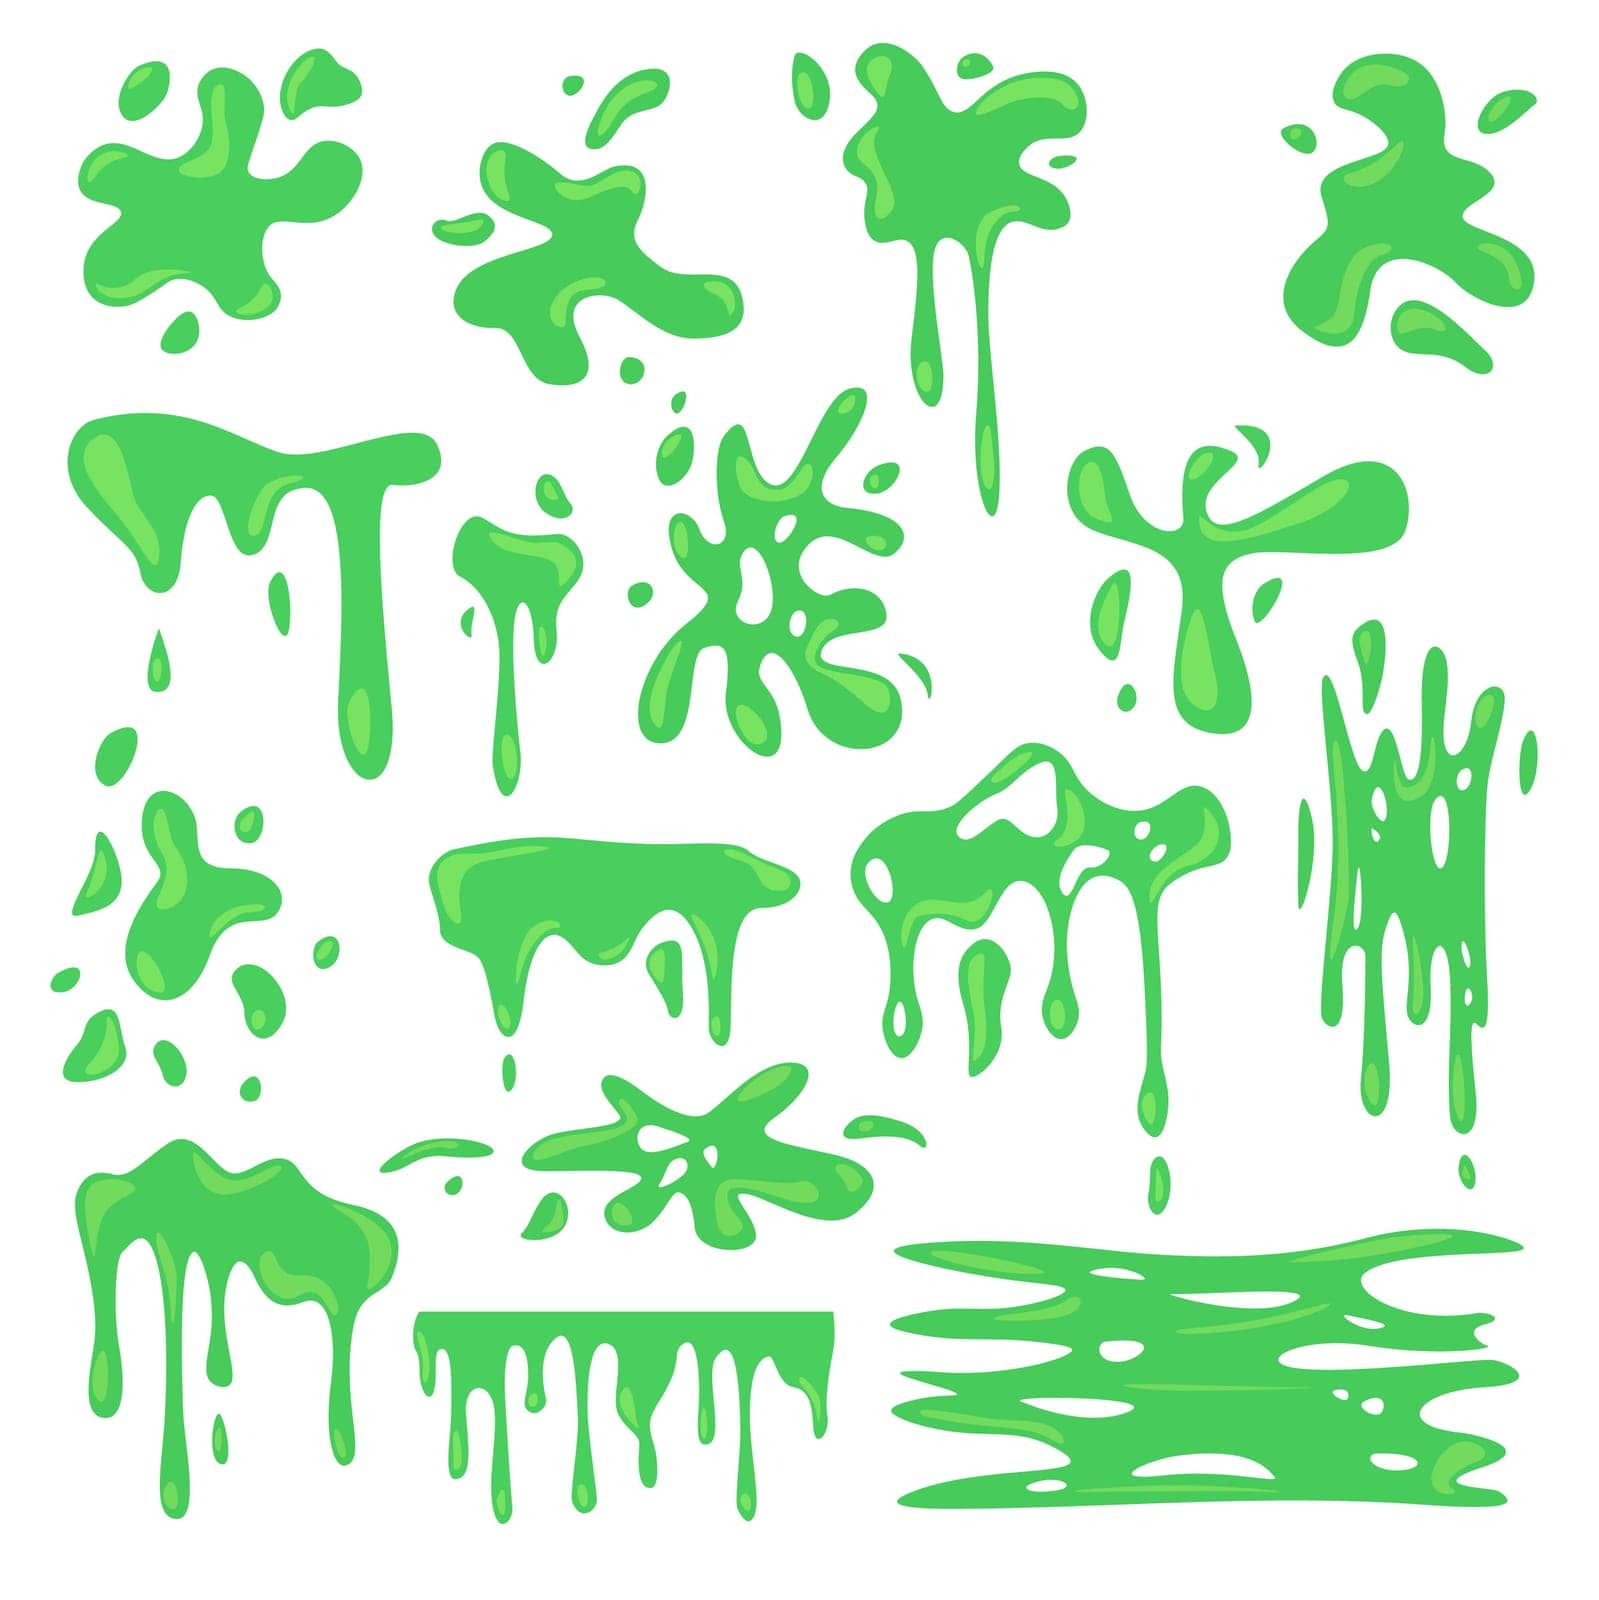 Toxic various green slime flat set for web design by pchvector